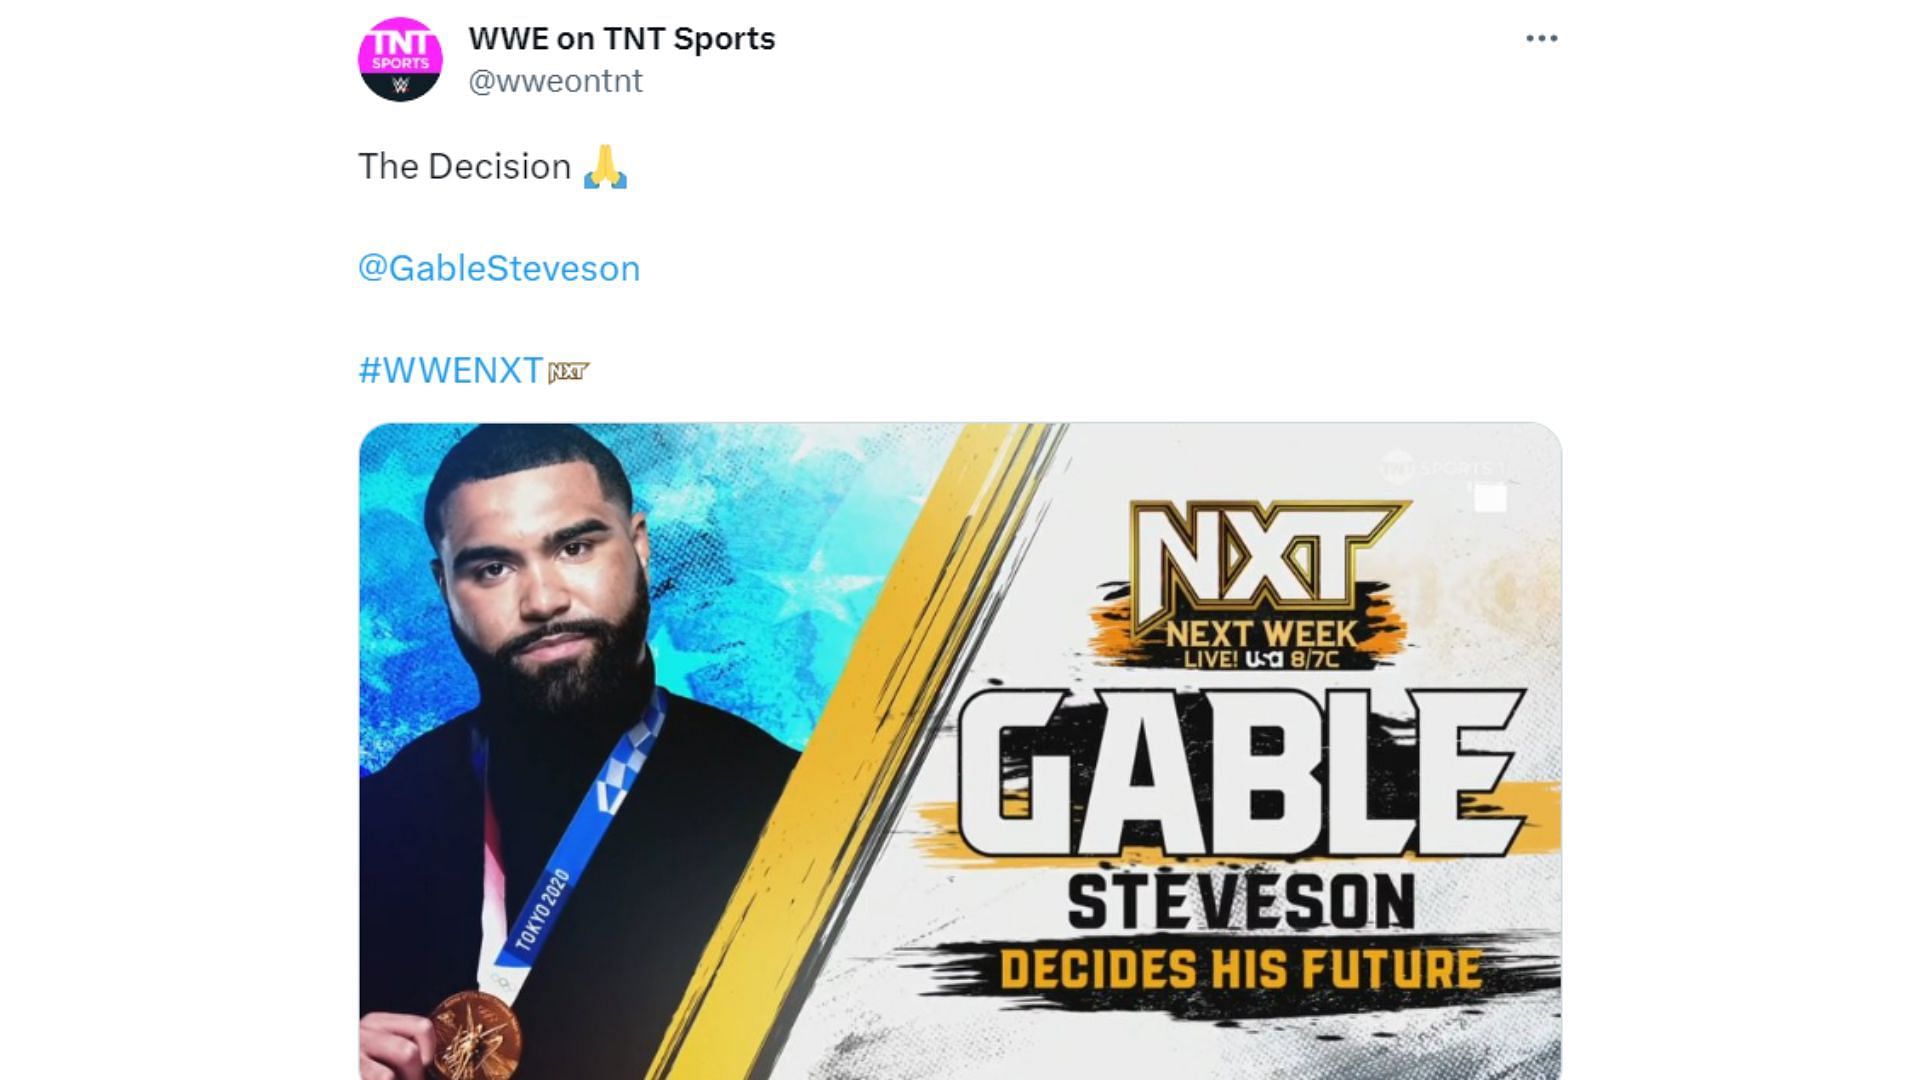 Gable Steveson will make his decision next week.